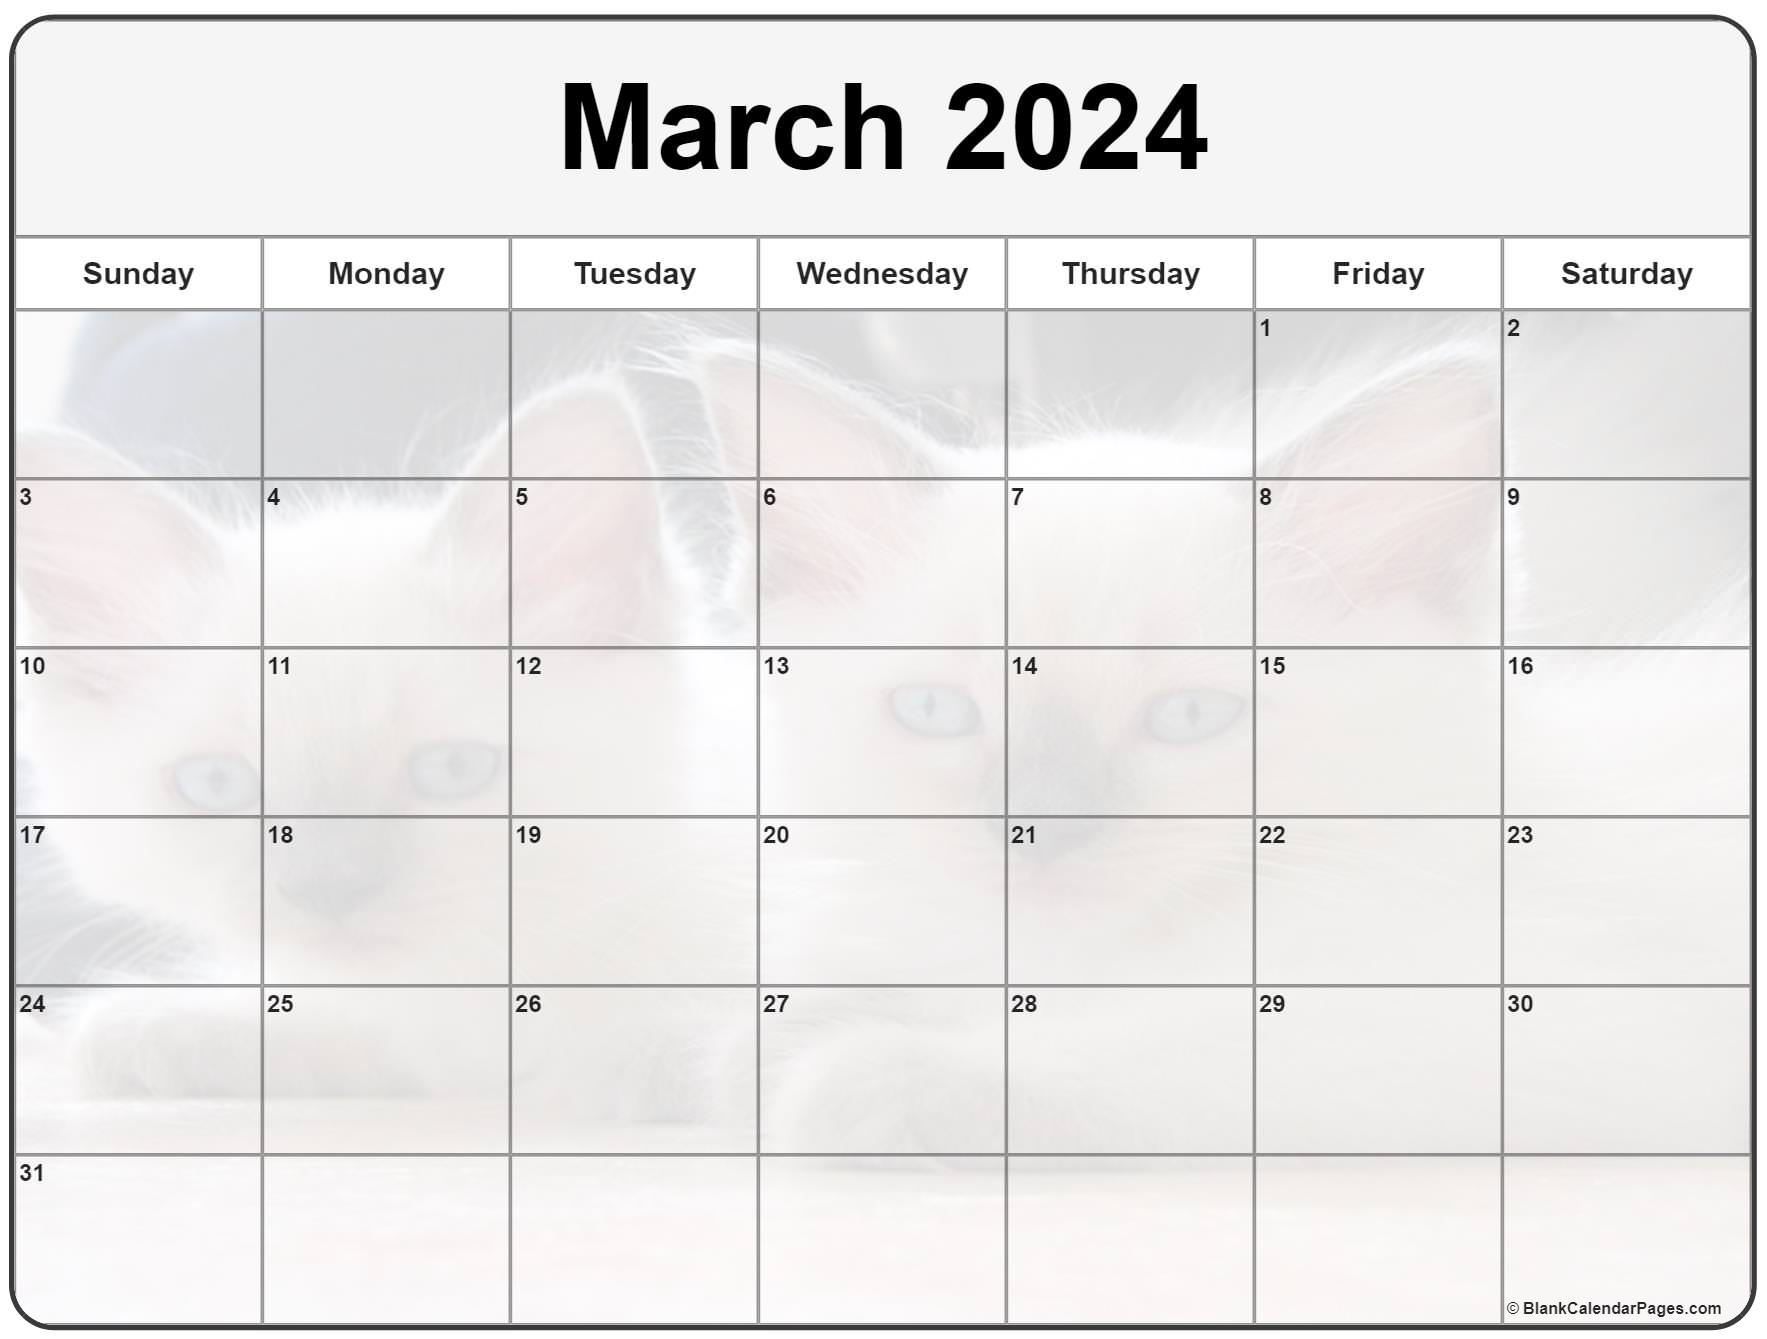 Collection of March 2023 photo calendars with image filters.